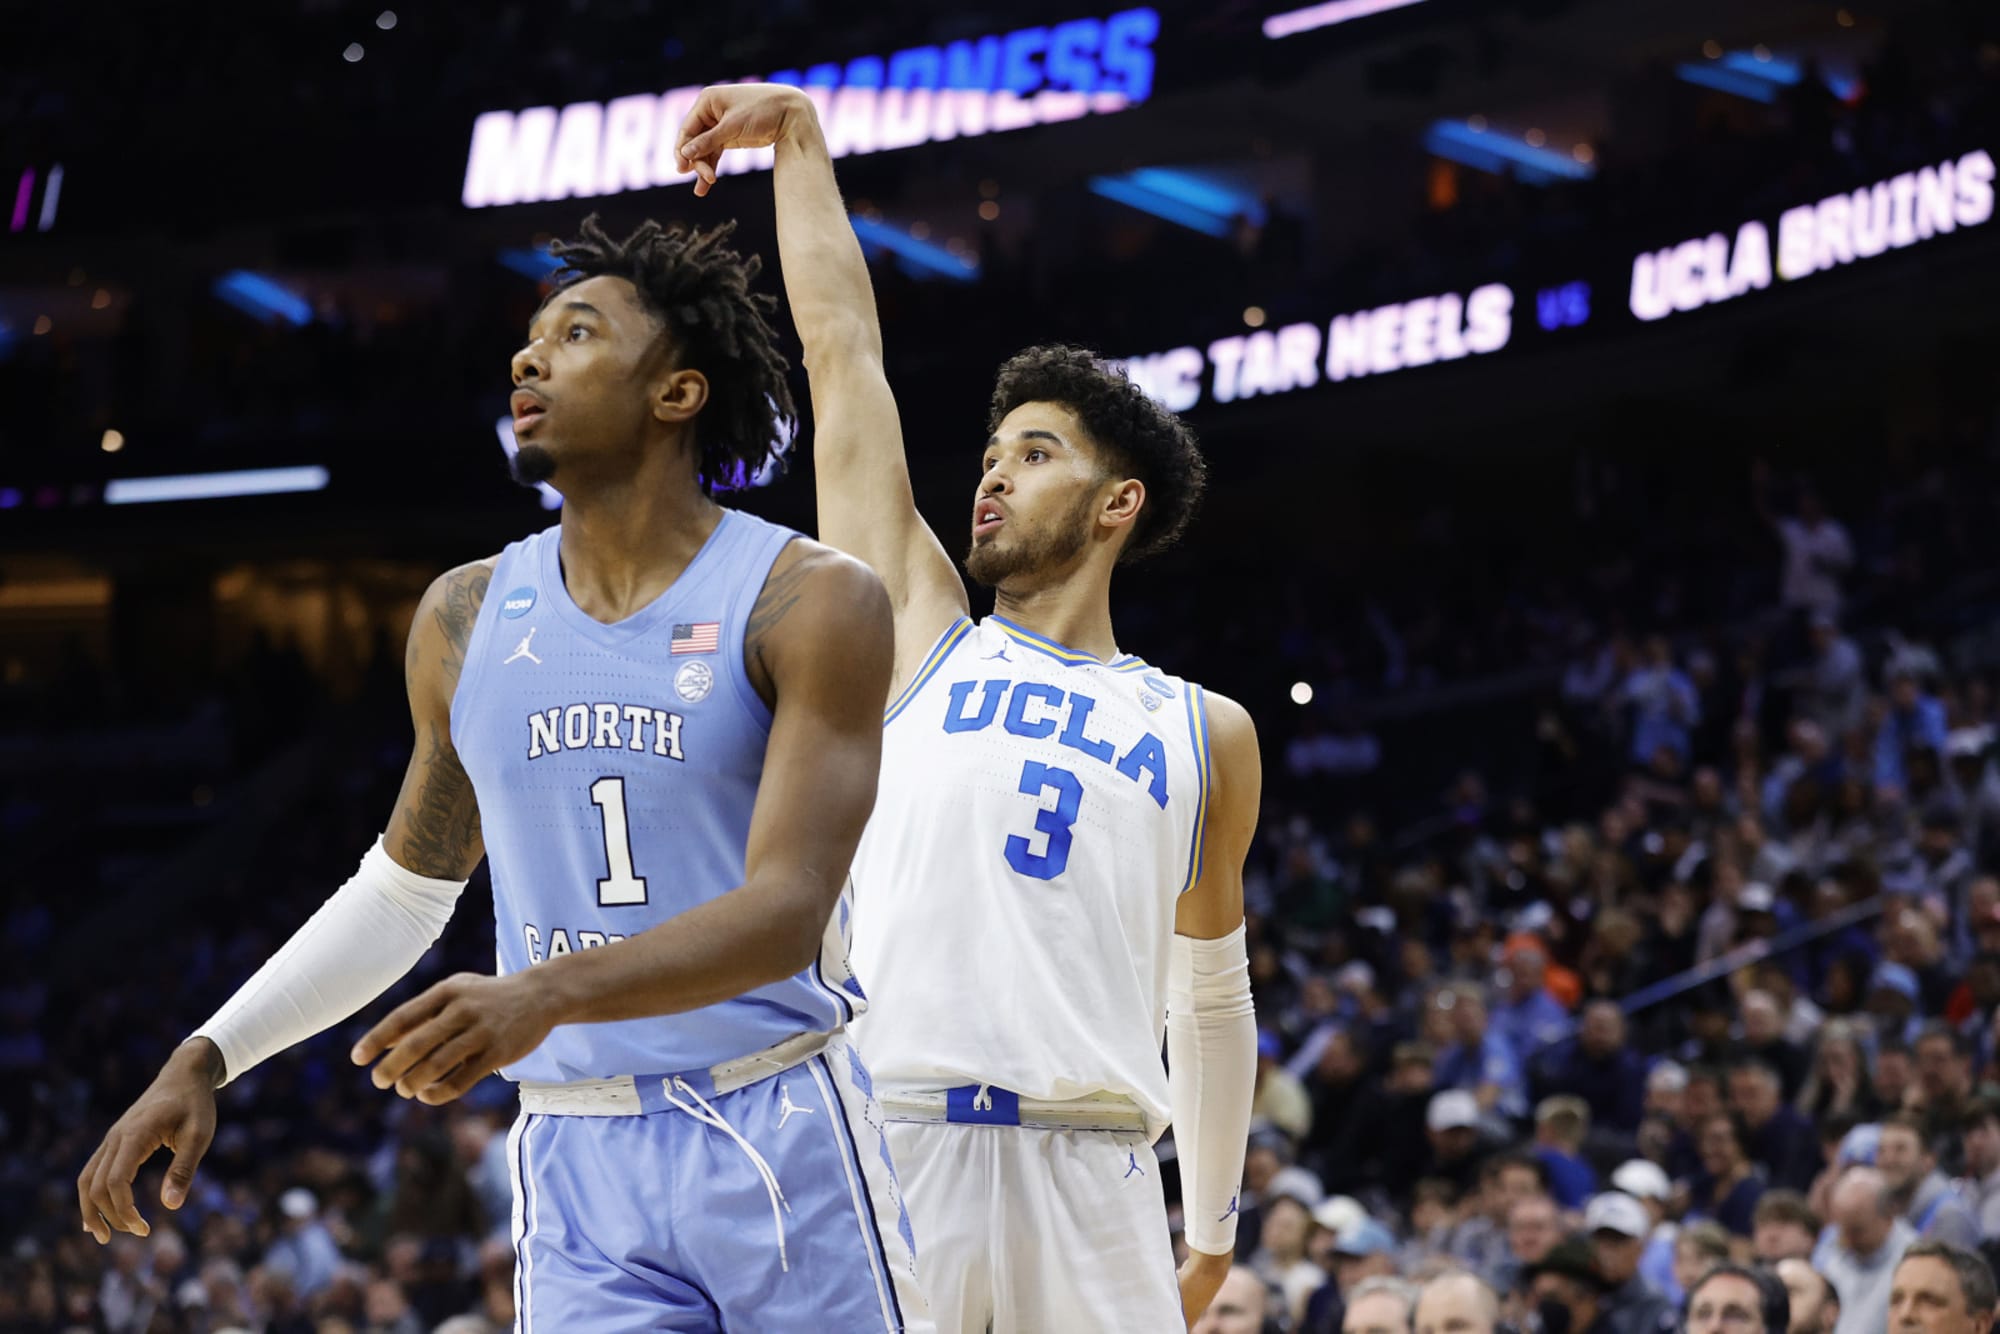 UCLA's Johnny Juzang declares for NBA draft, but isn't gone yet – Daily News